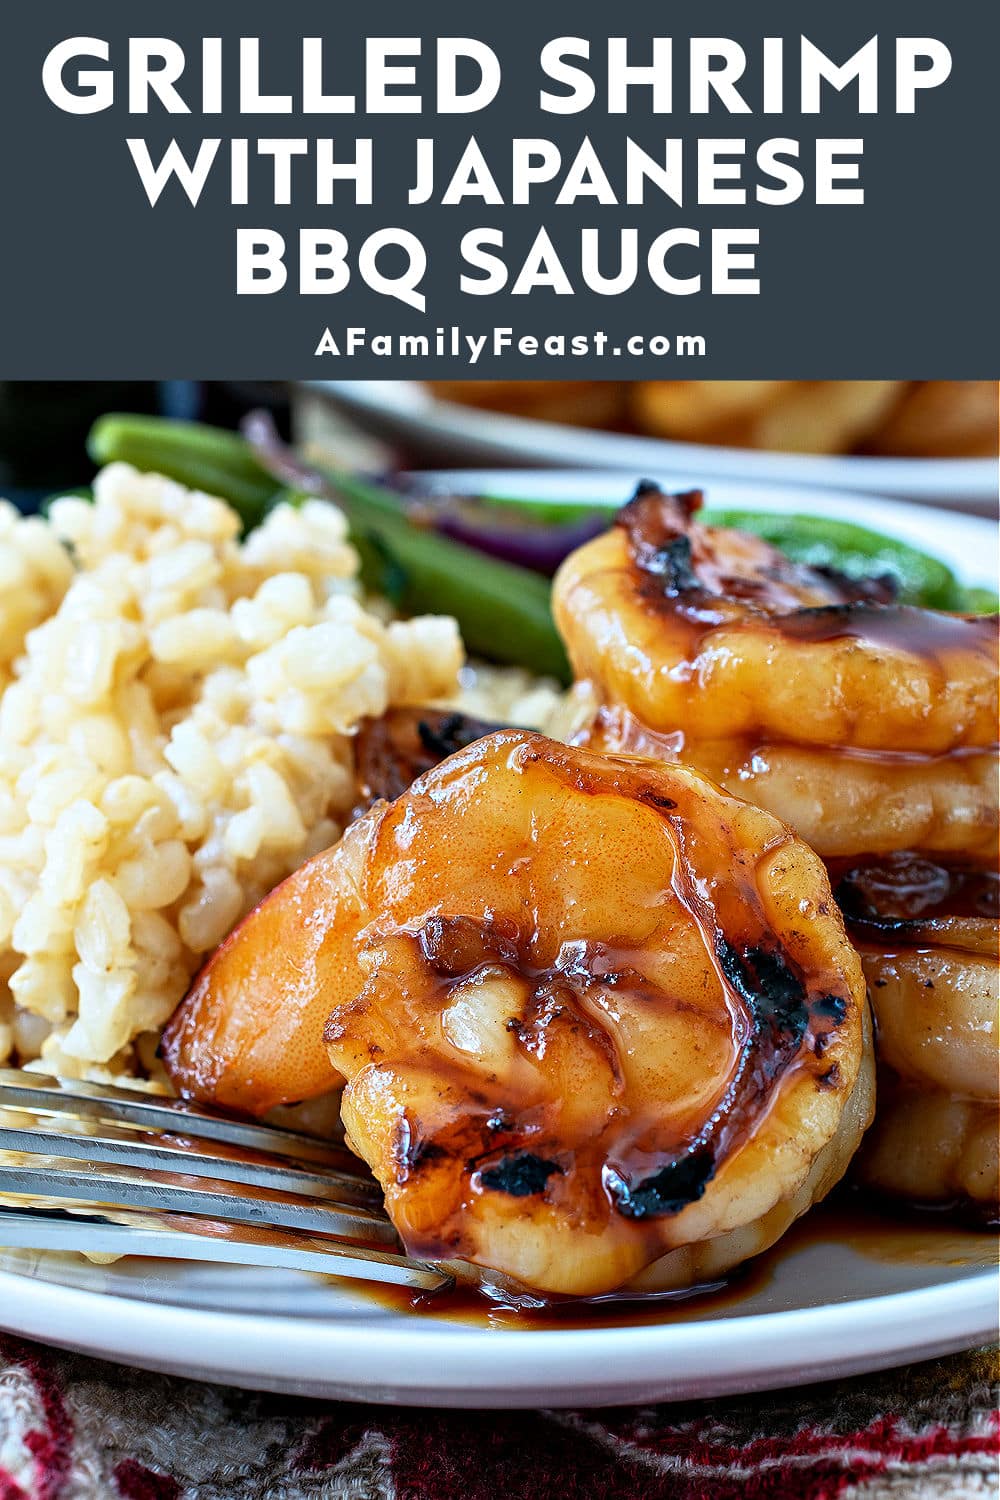 Grilled Shrimp with Japanese BBQ Sauce - A Family Feast